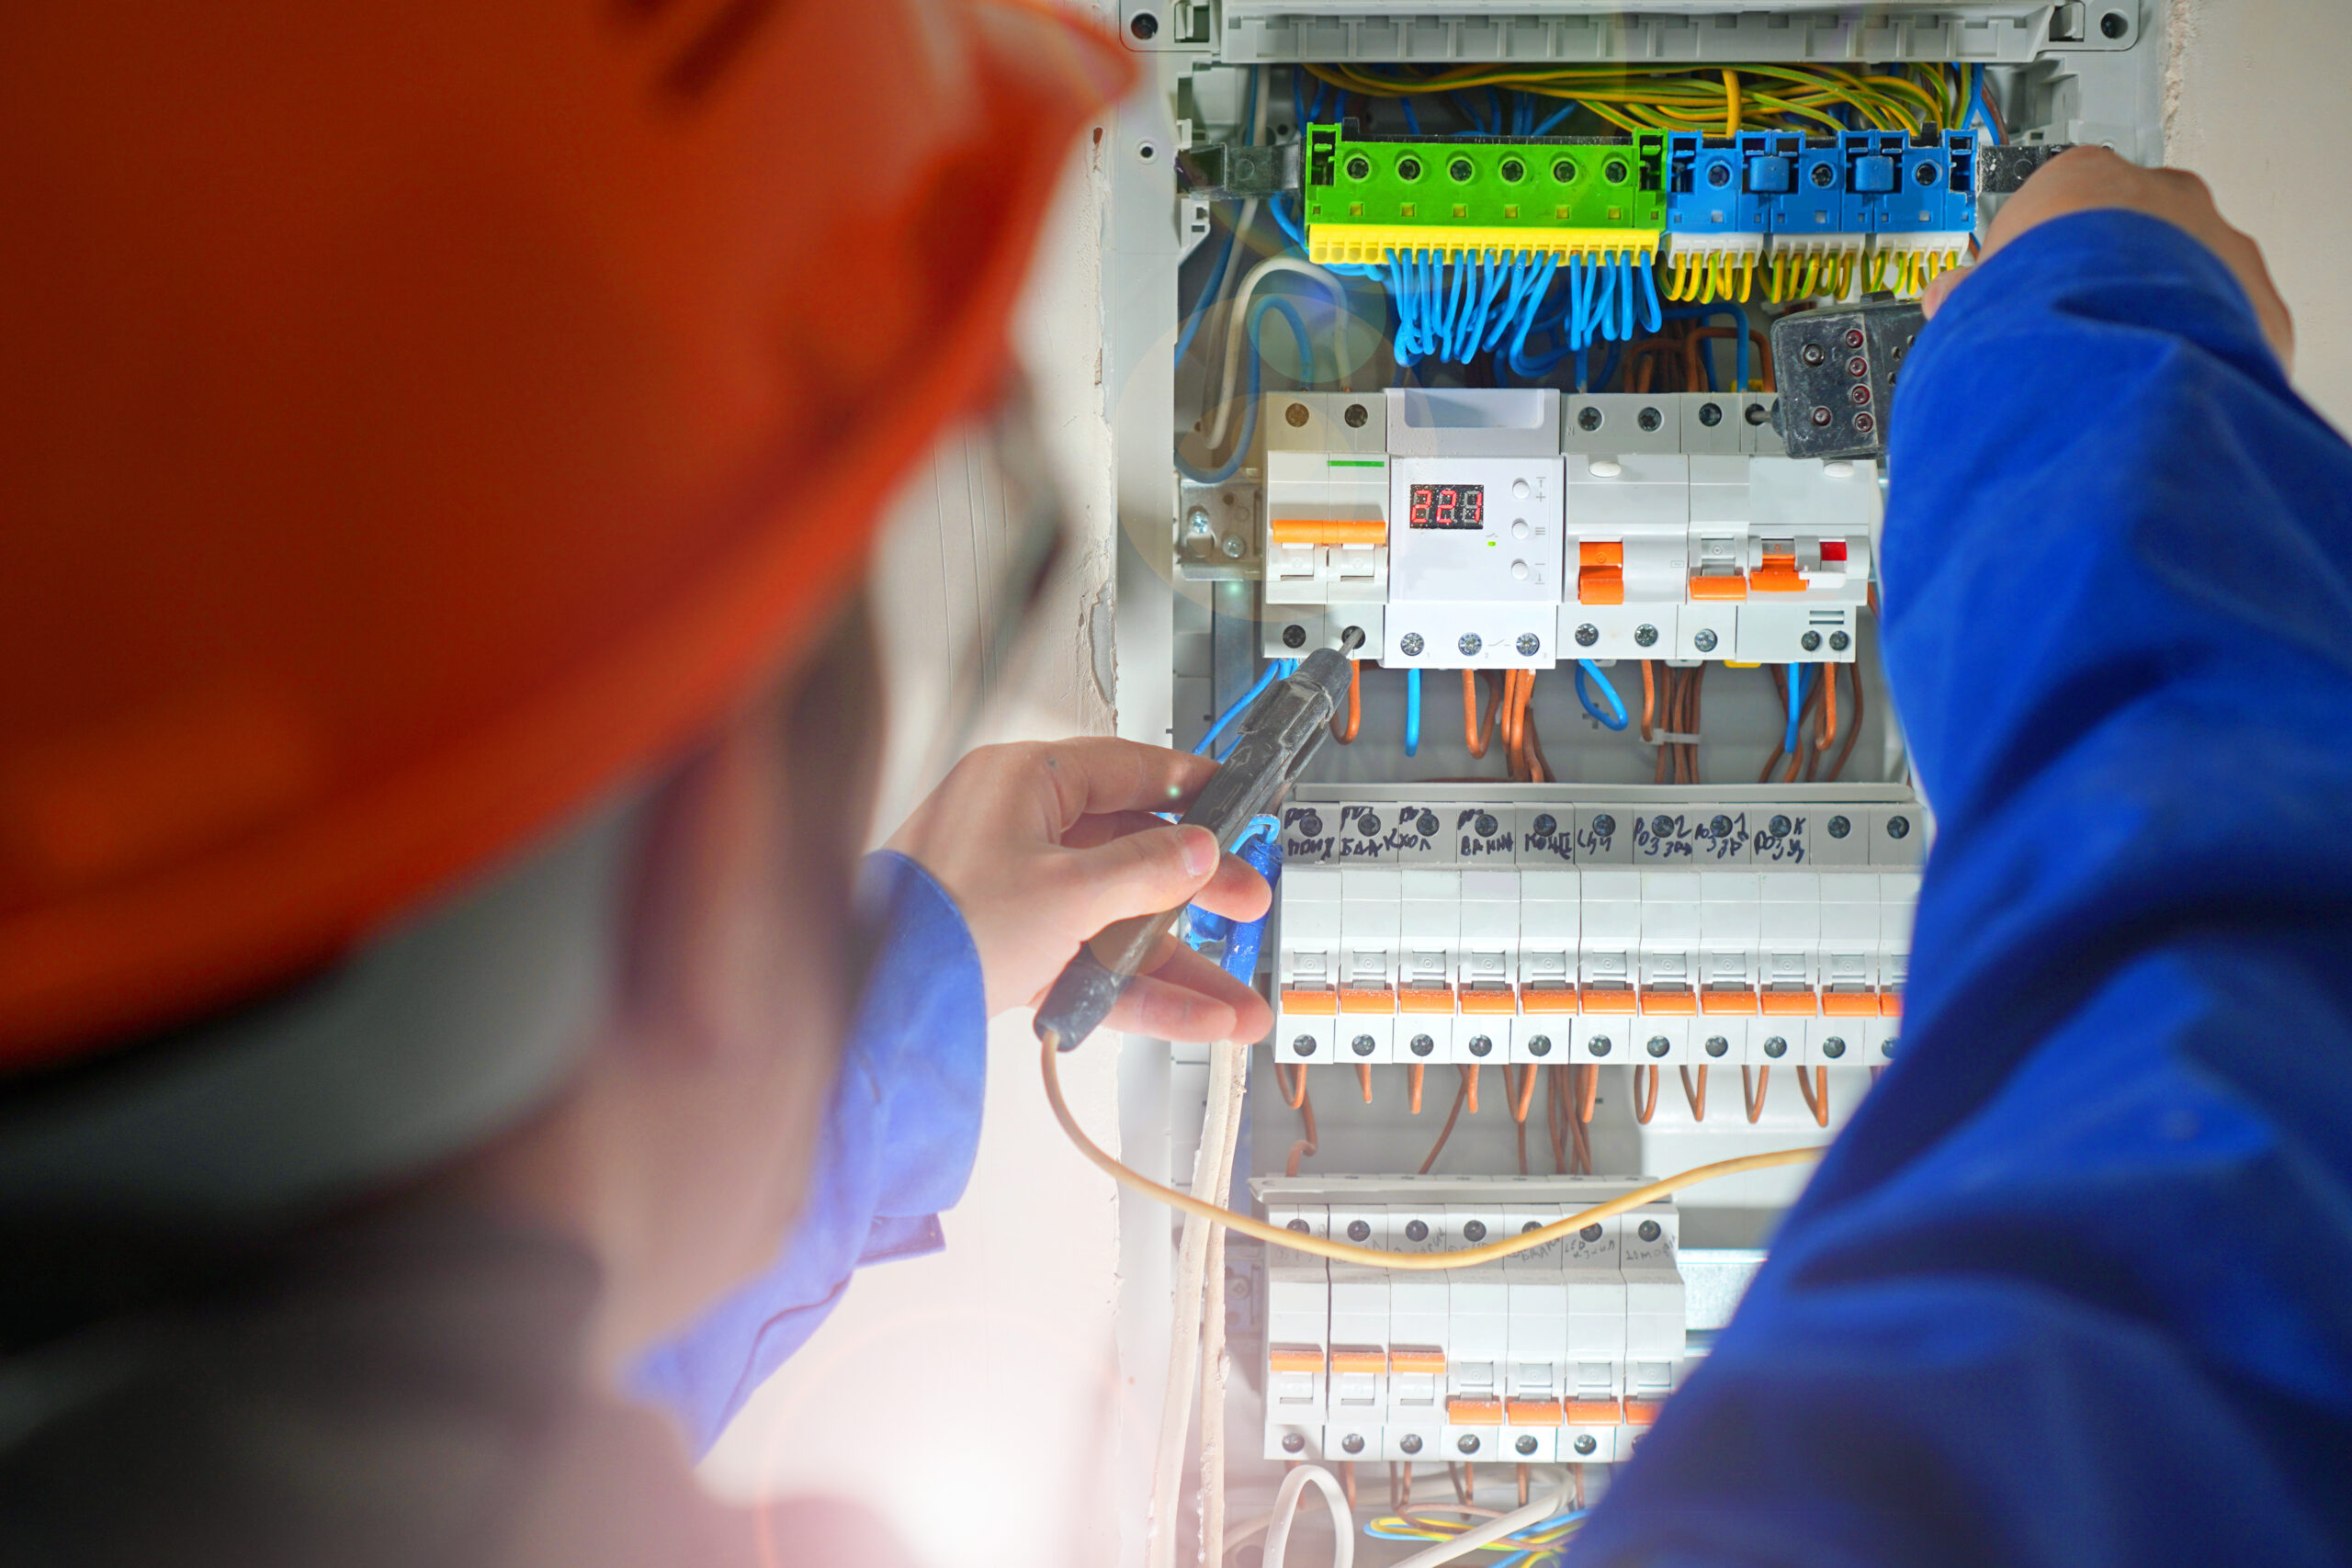 GB Electrical Services